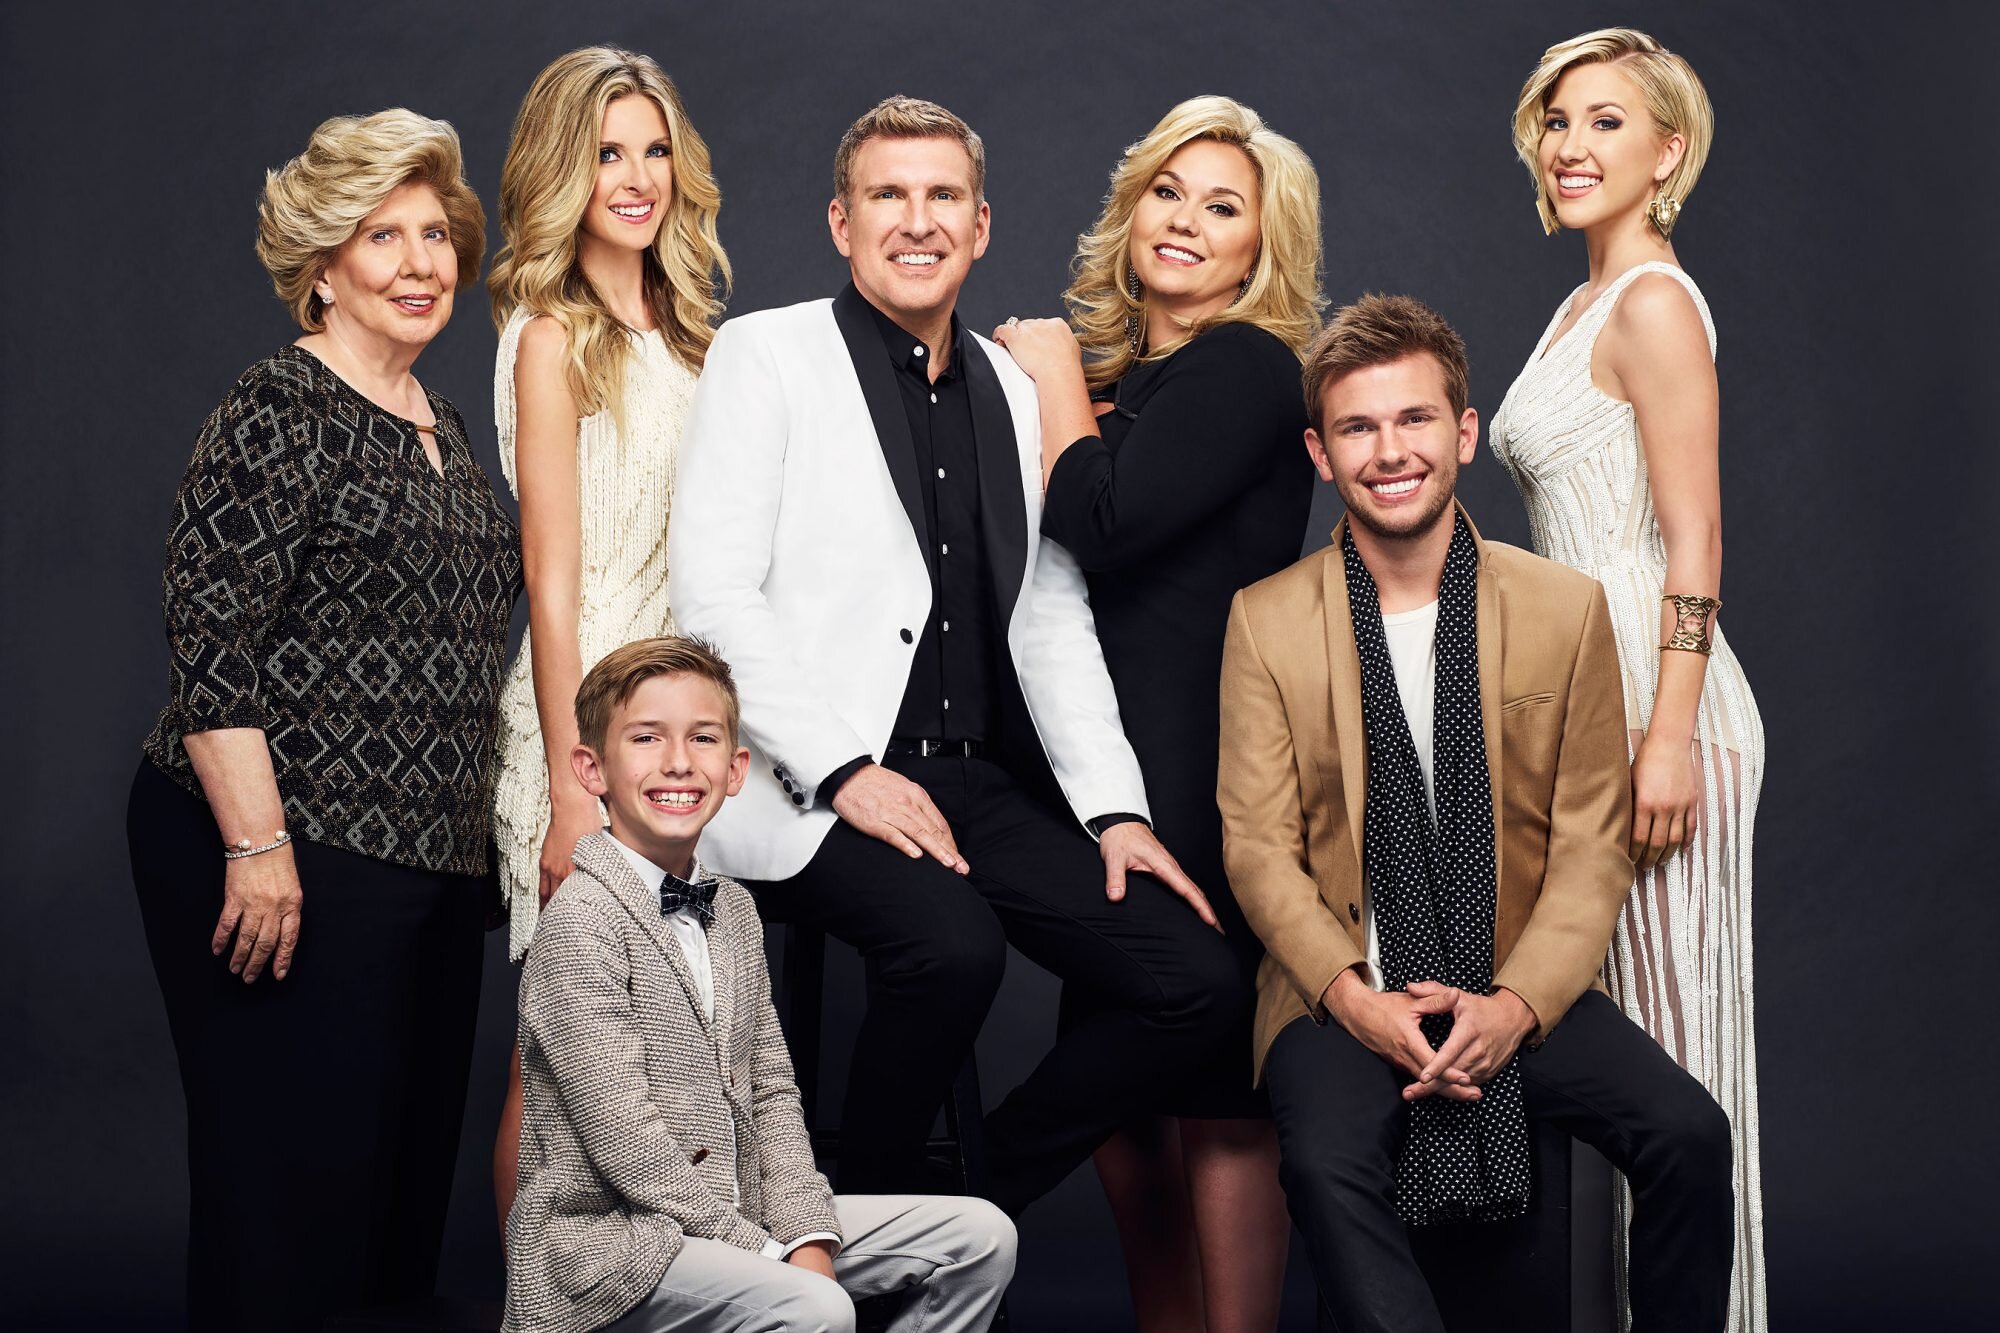 Chrisley Knows Best Julie Chrisley Is READY To Plow Her Husband Todd’s Face!